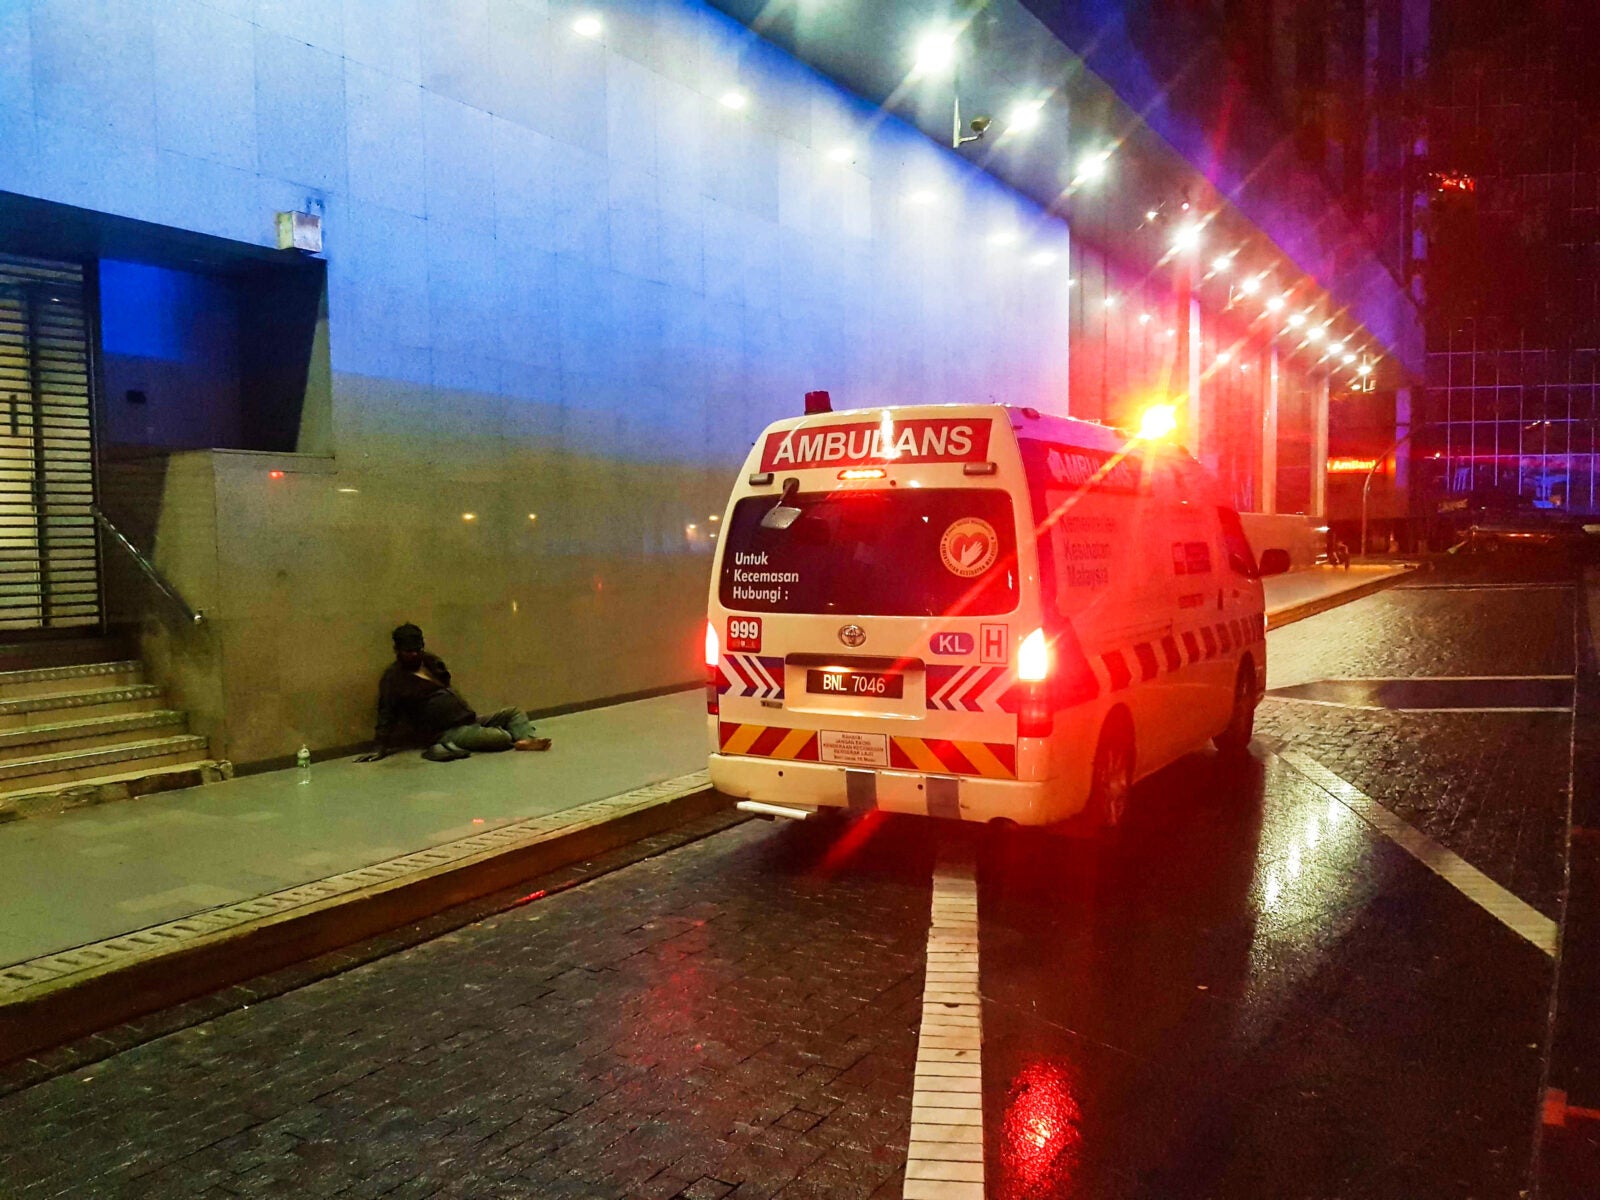 An ambulance parking at the side of the street, in front of a Homeless Malaysian Man.